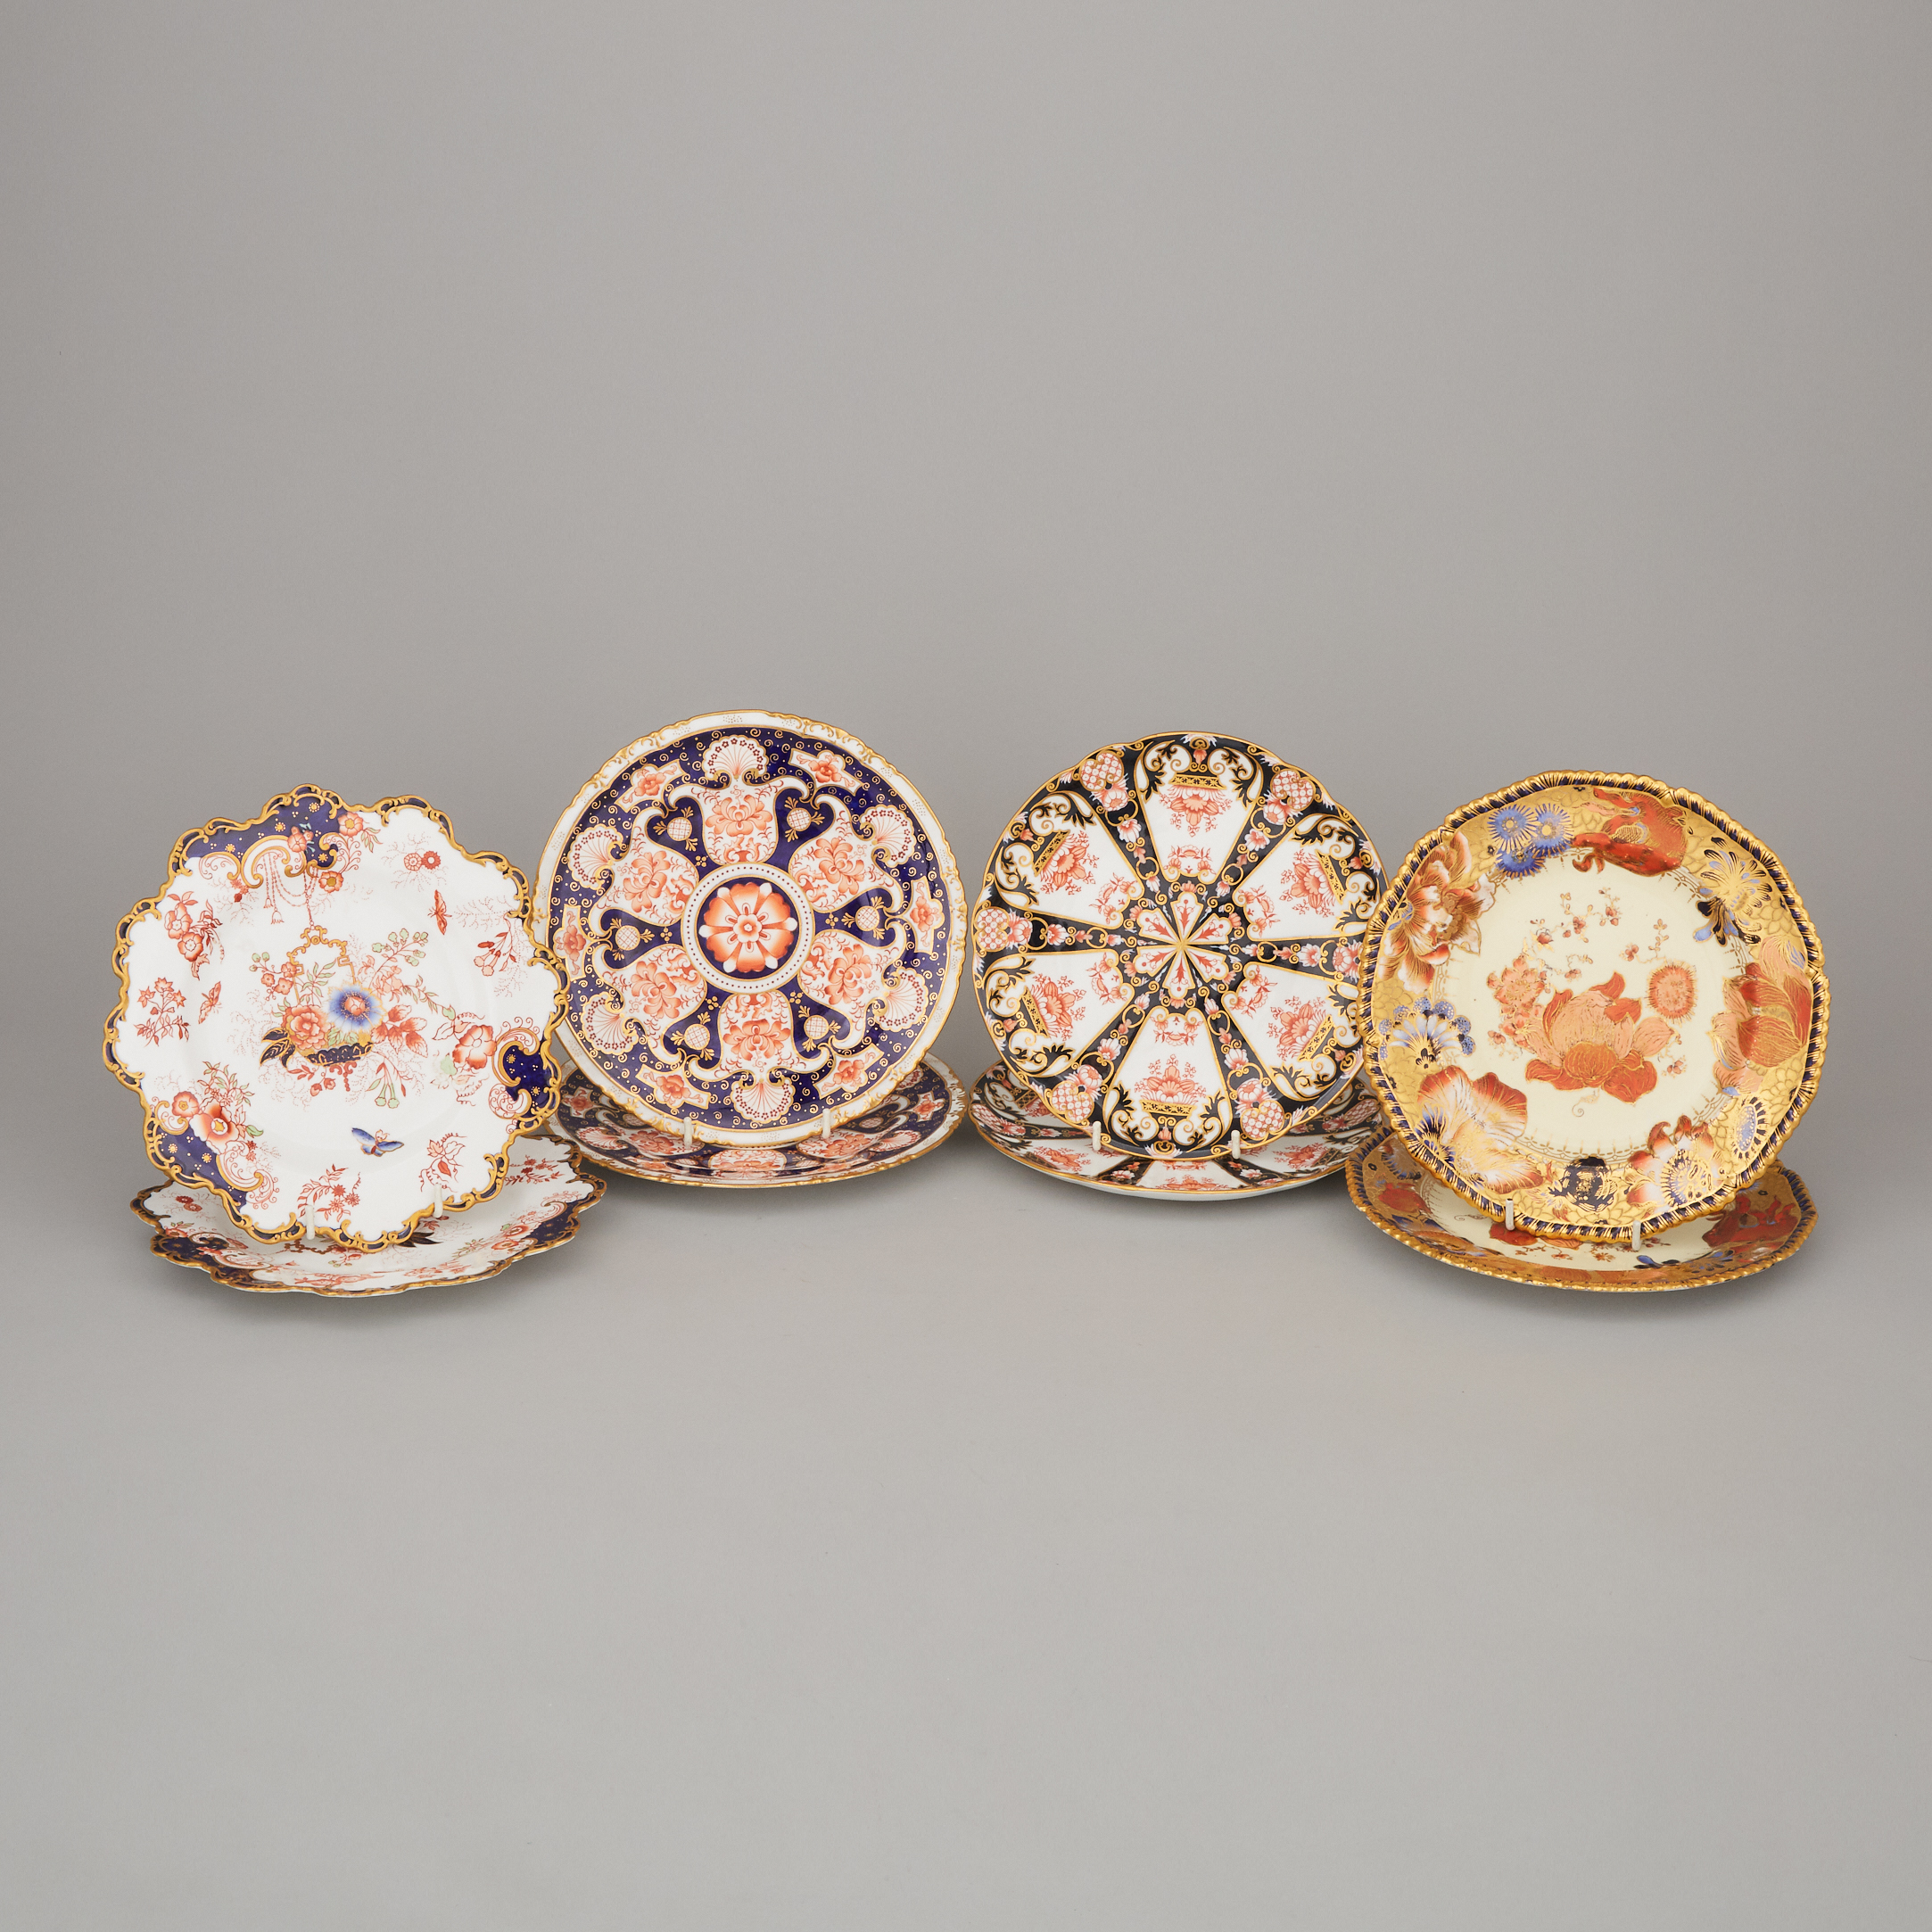 Four Pairs of Royal Crown Derby Dessert Plates, 20th century